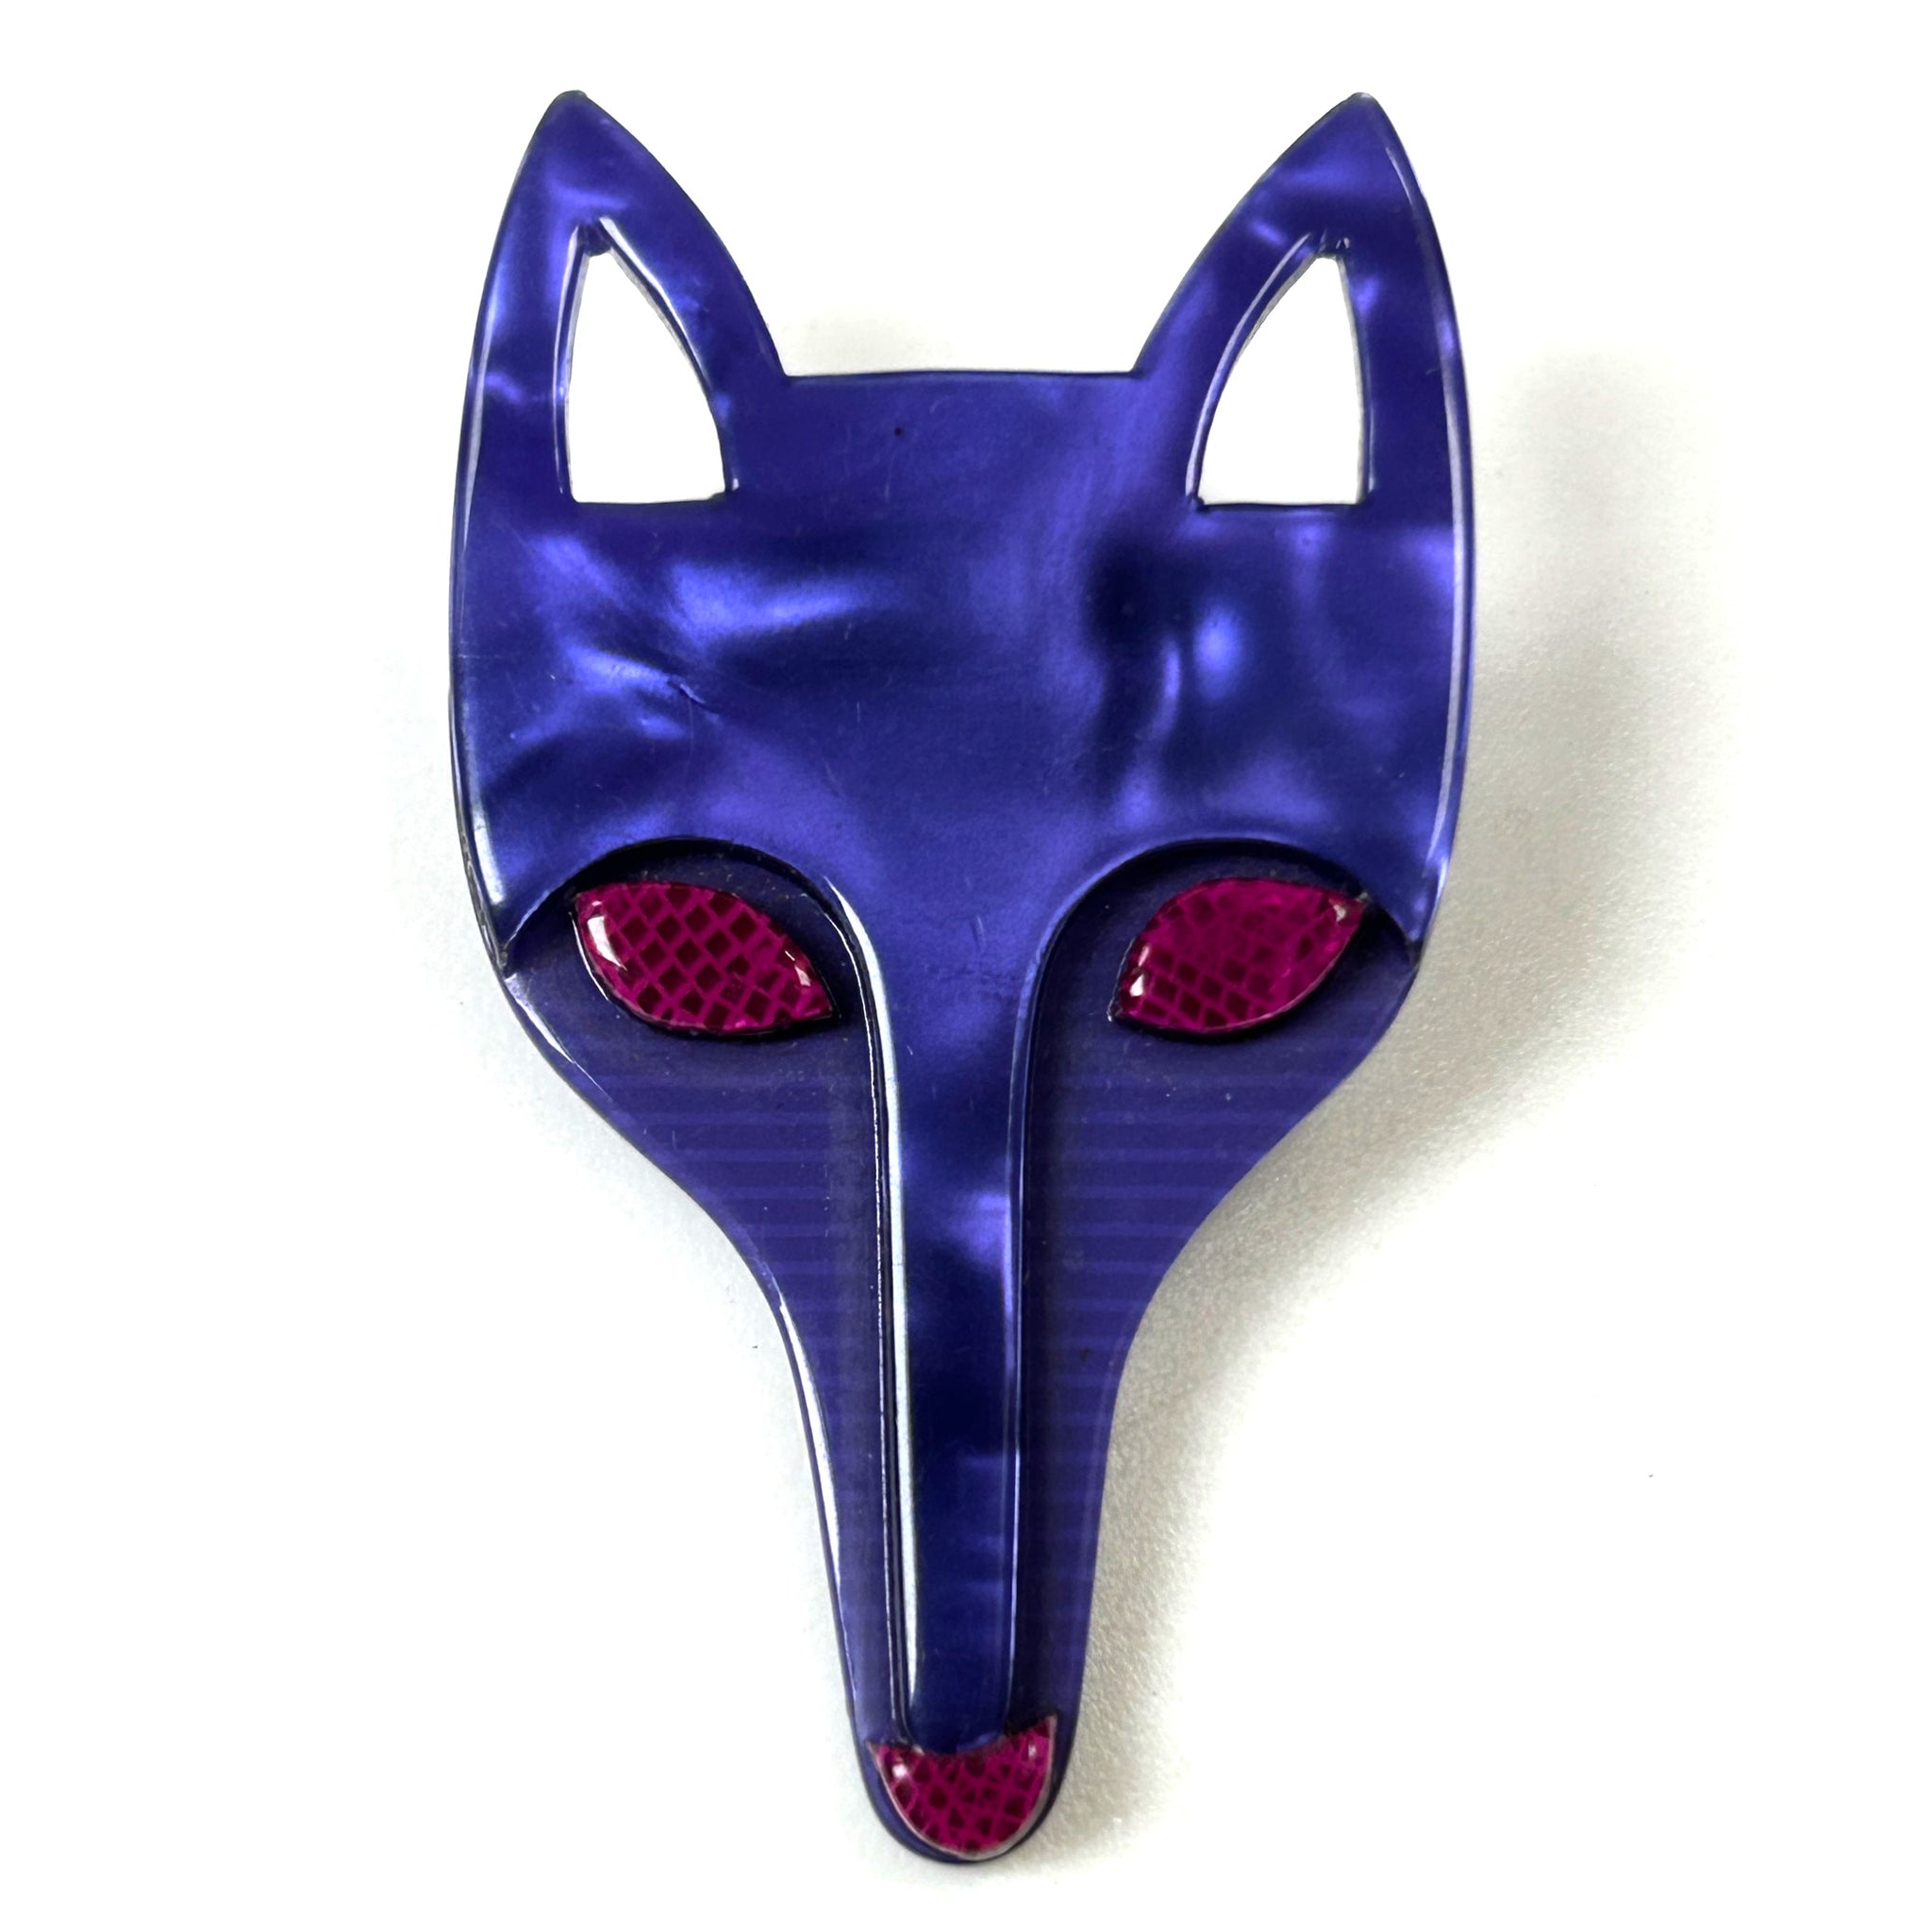 Large Purple and Red “Fox” Brooch by Lea Stein, Paris